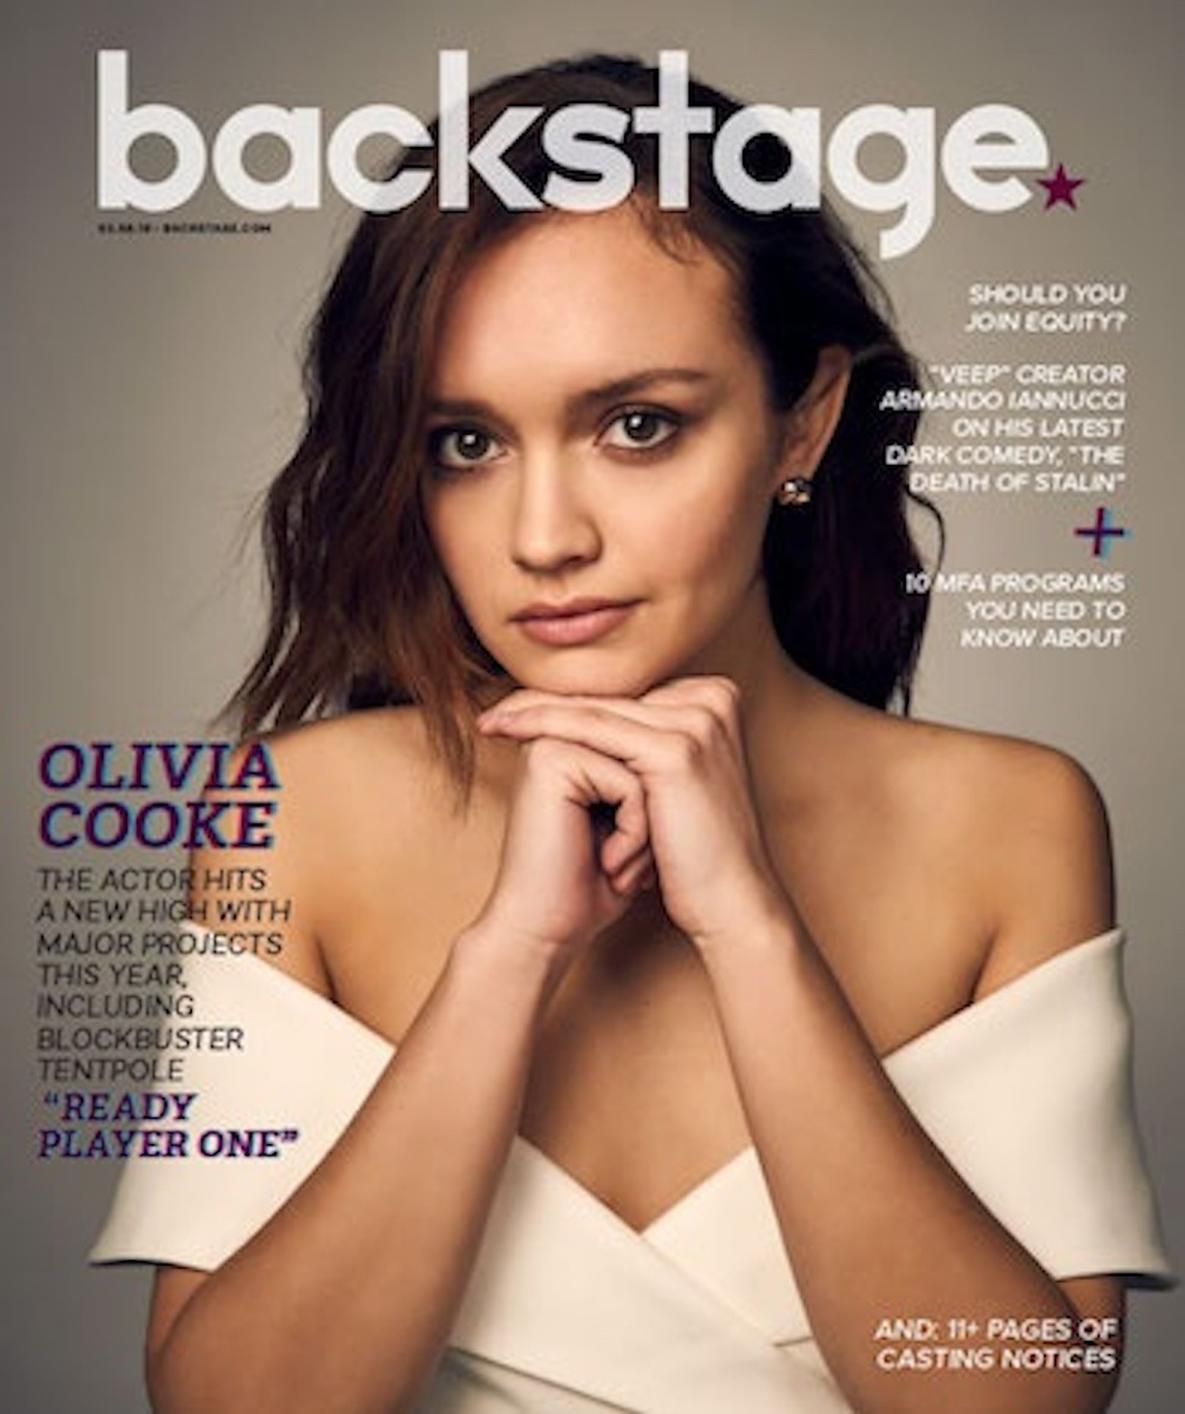 Ready Player One': Who plays Art3mis? Olivia Cooke is everywhere